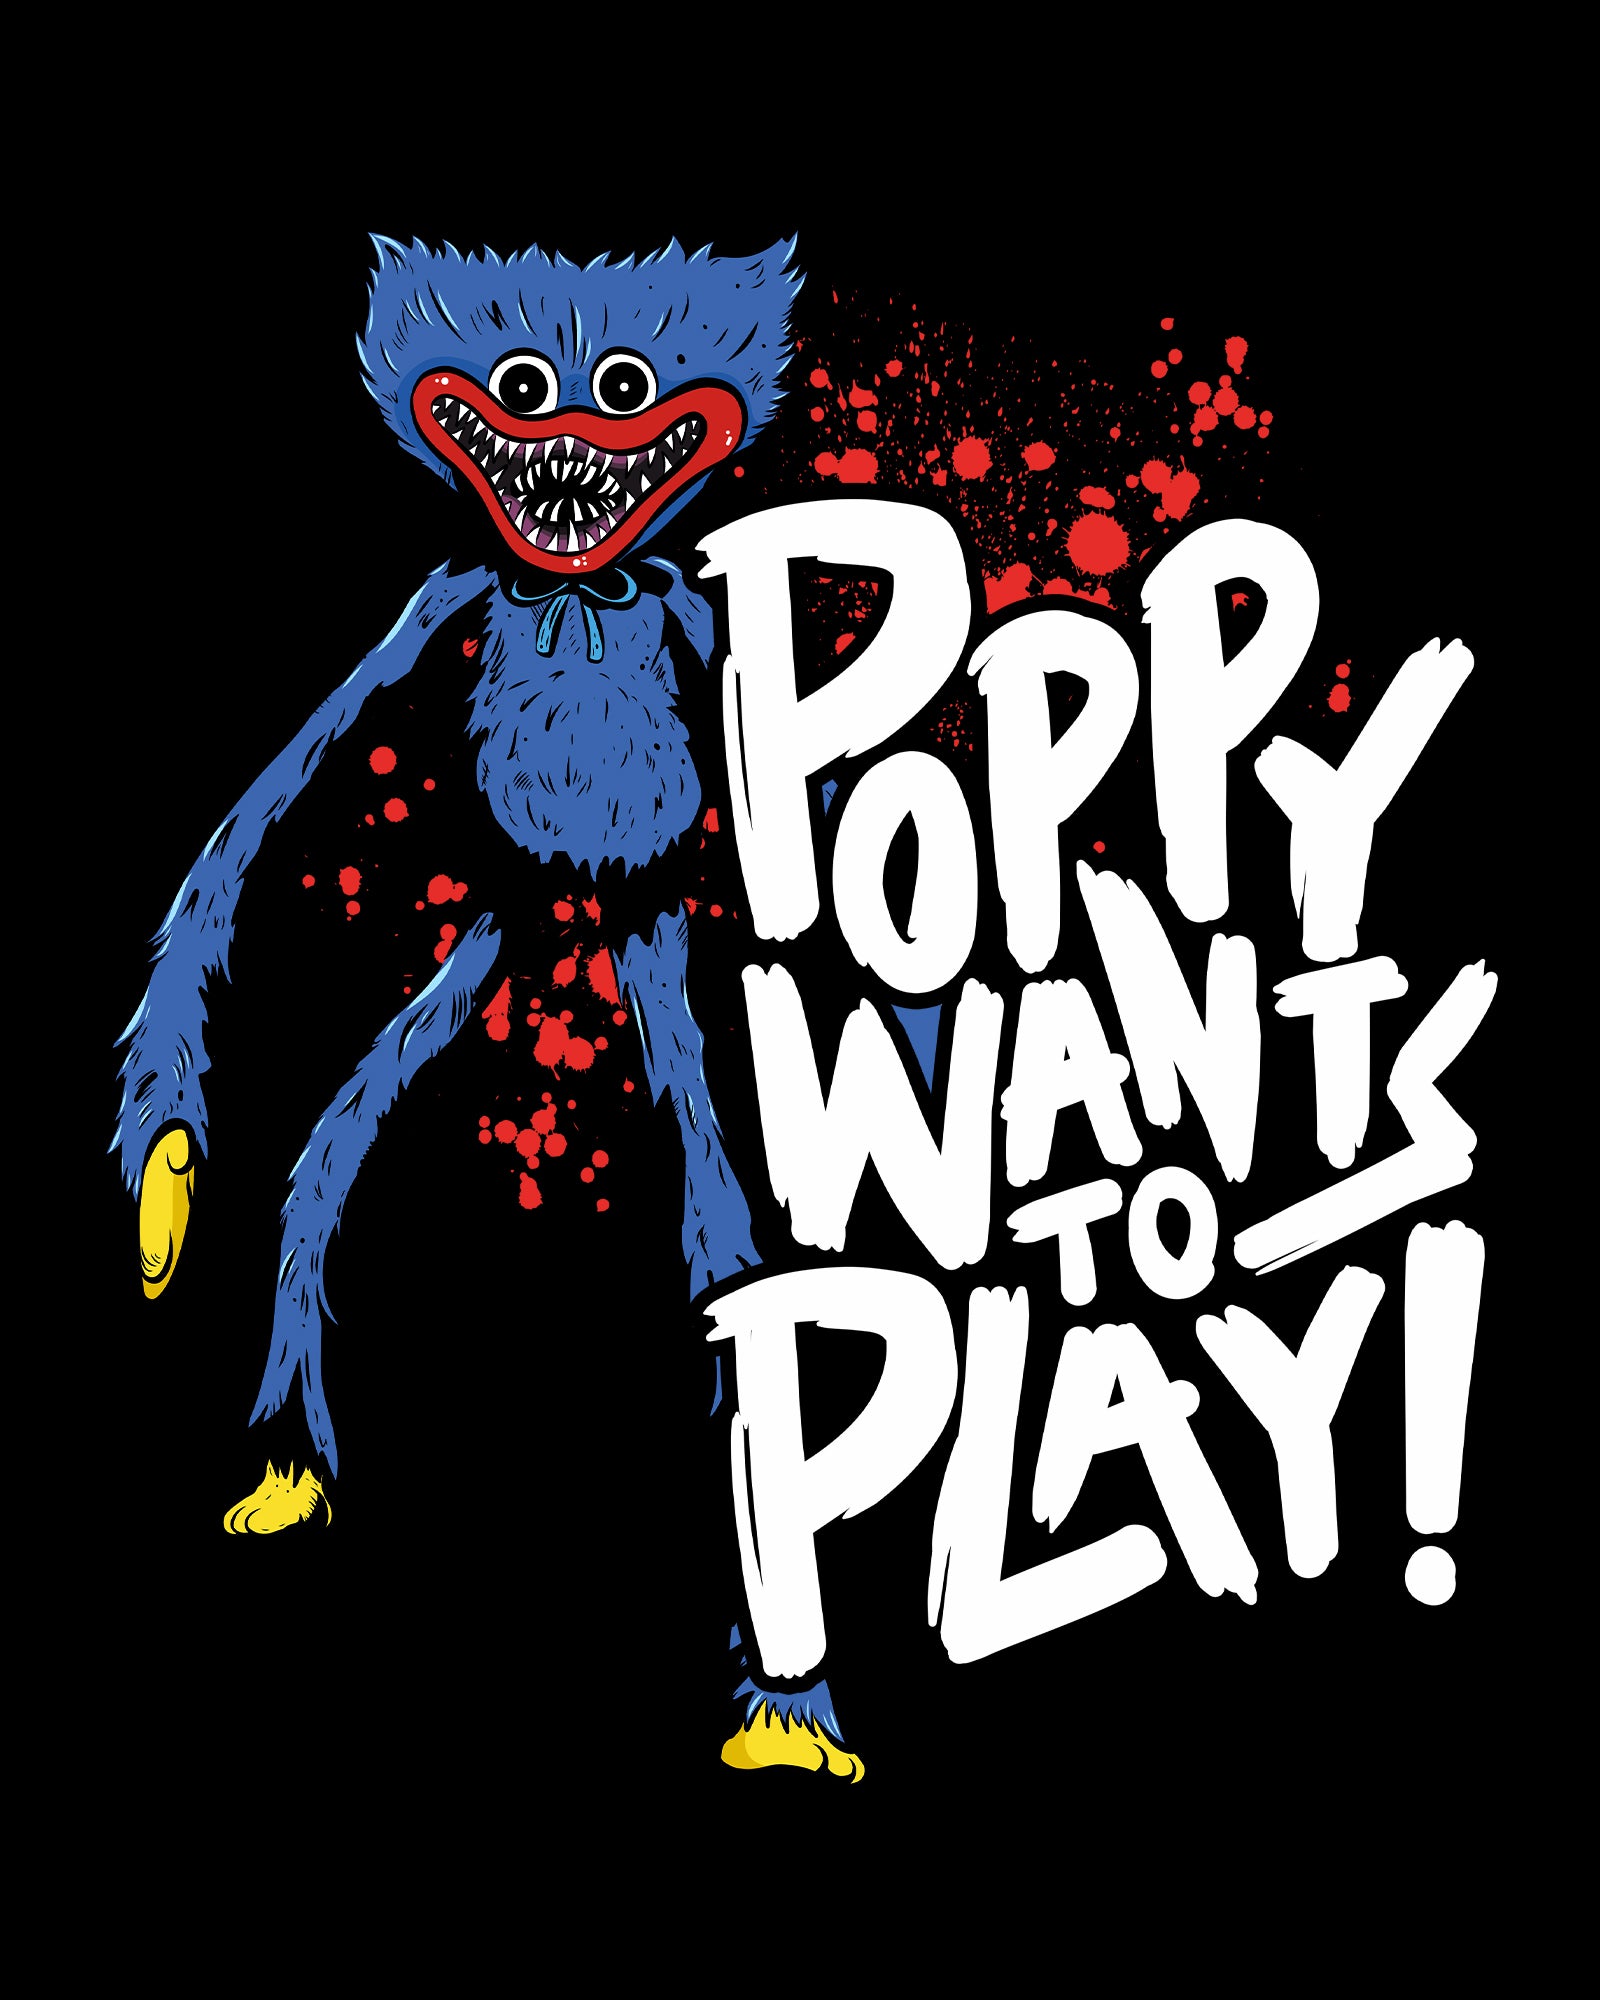 image on shirt: scary huggy wuggy with blood spatters. text: poppy wants to play!